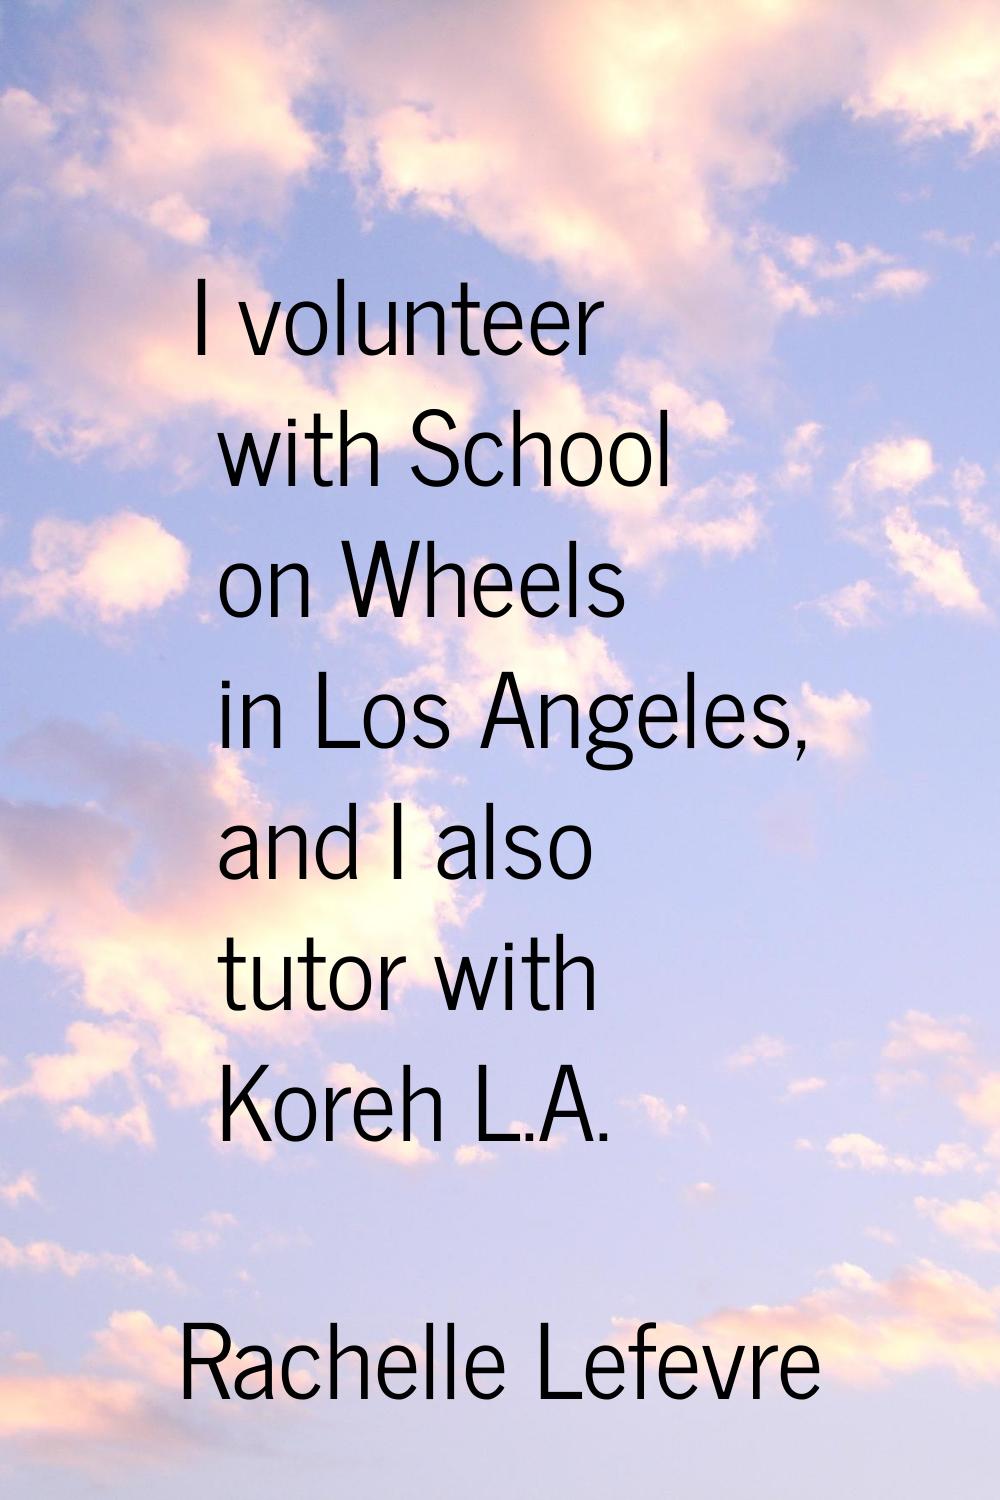 I volunteer with School on Wheels in Los Angeles, and I also tutor with Koreh L.A.